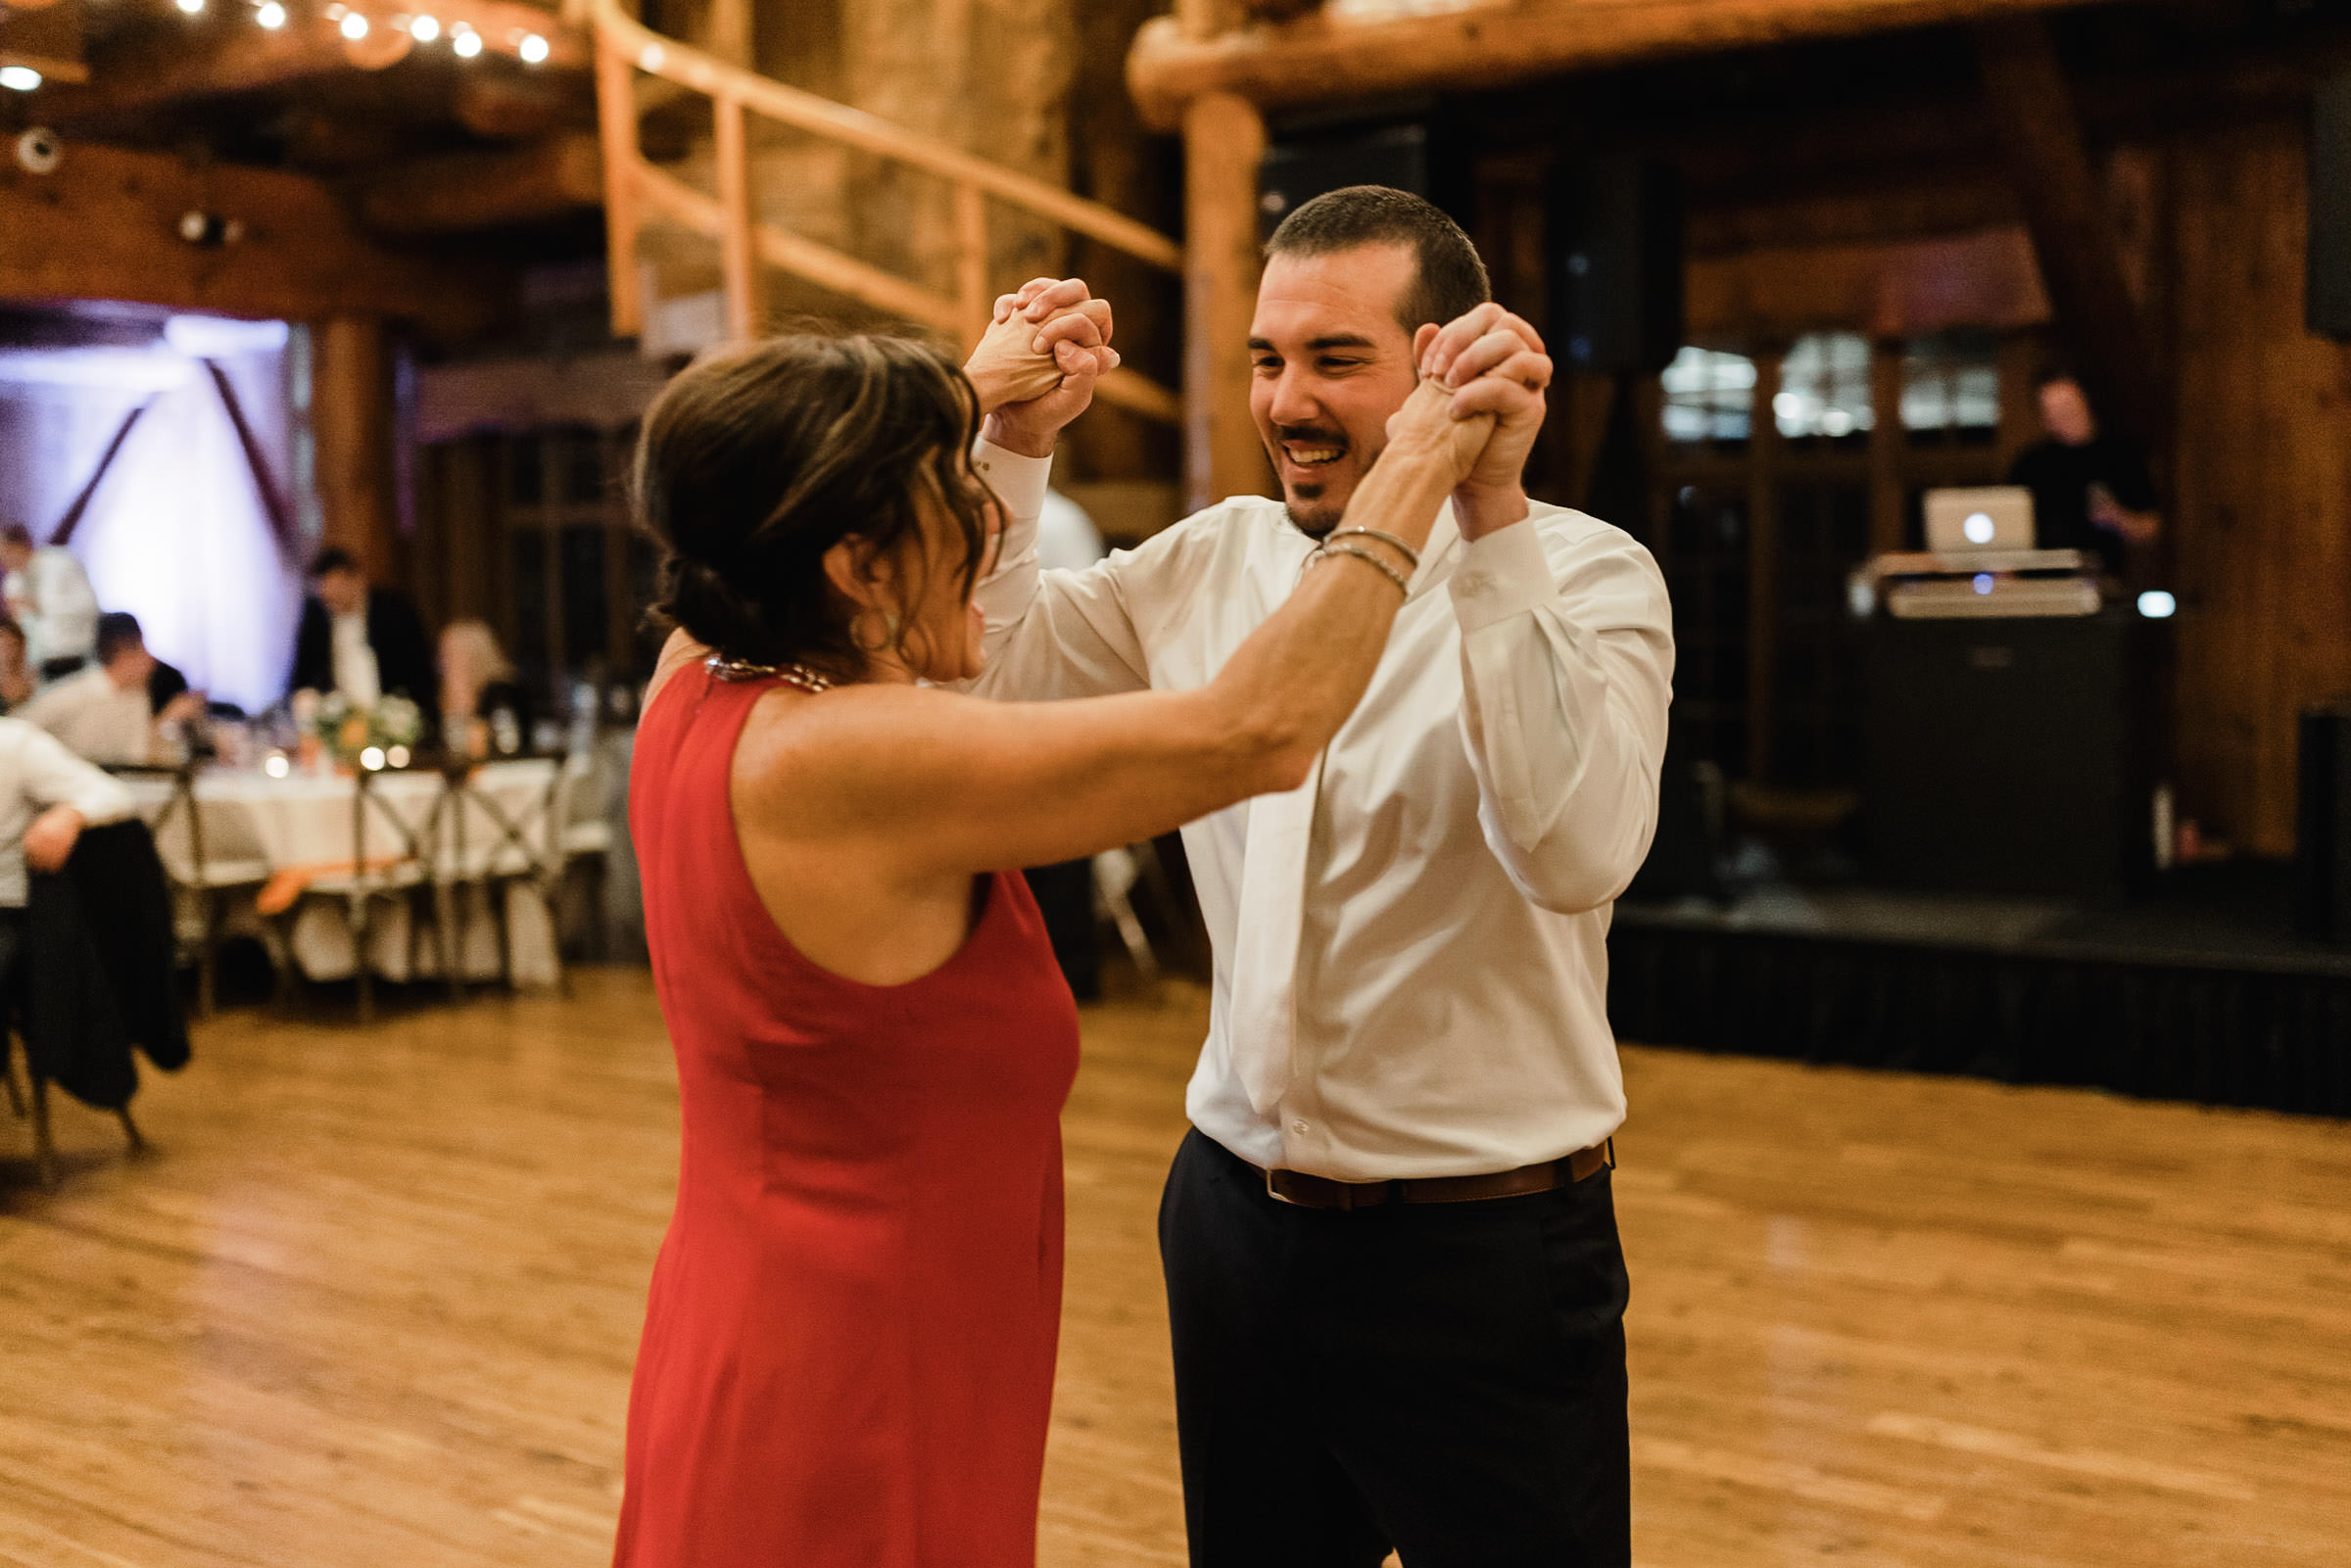 Groom and his mom dance together